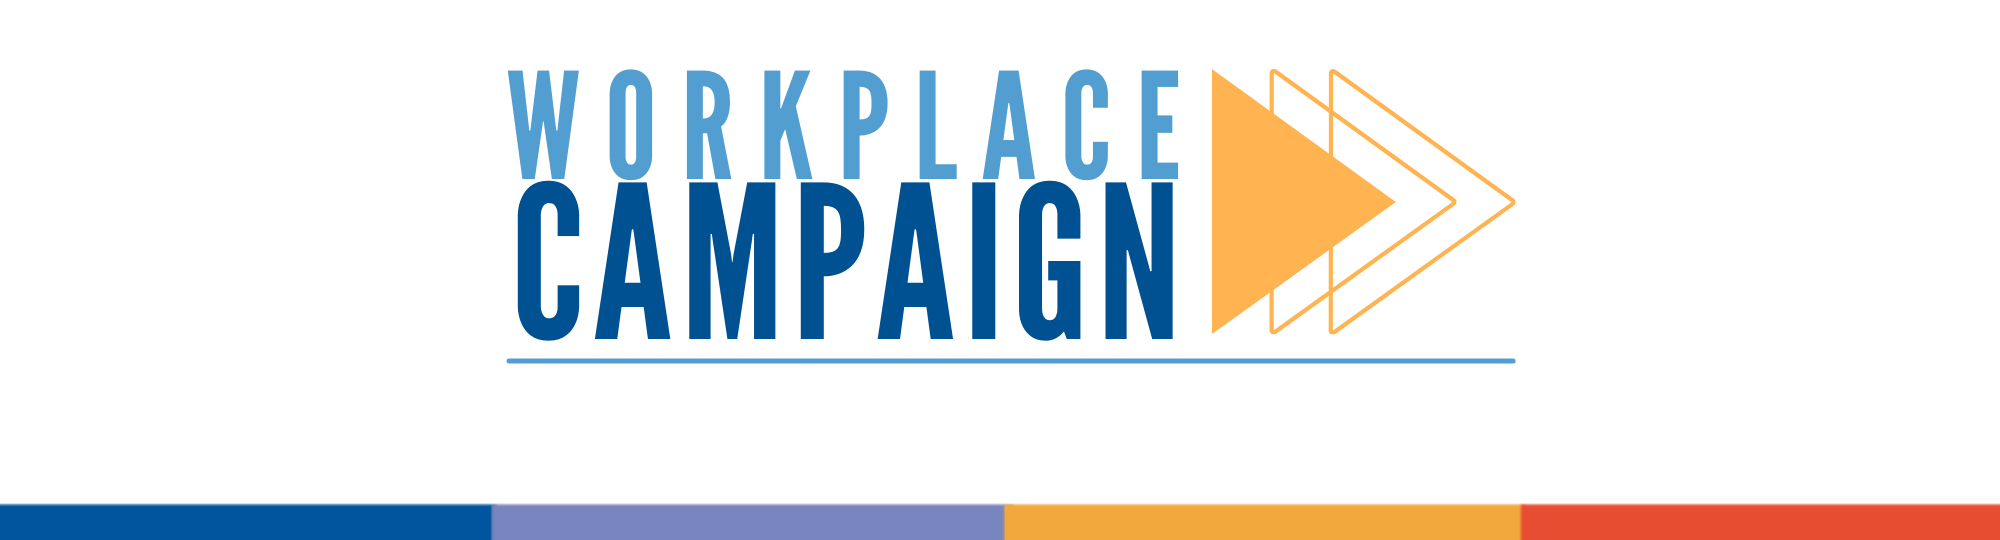 Workplace Campaign Header